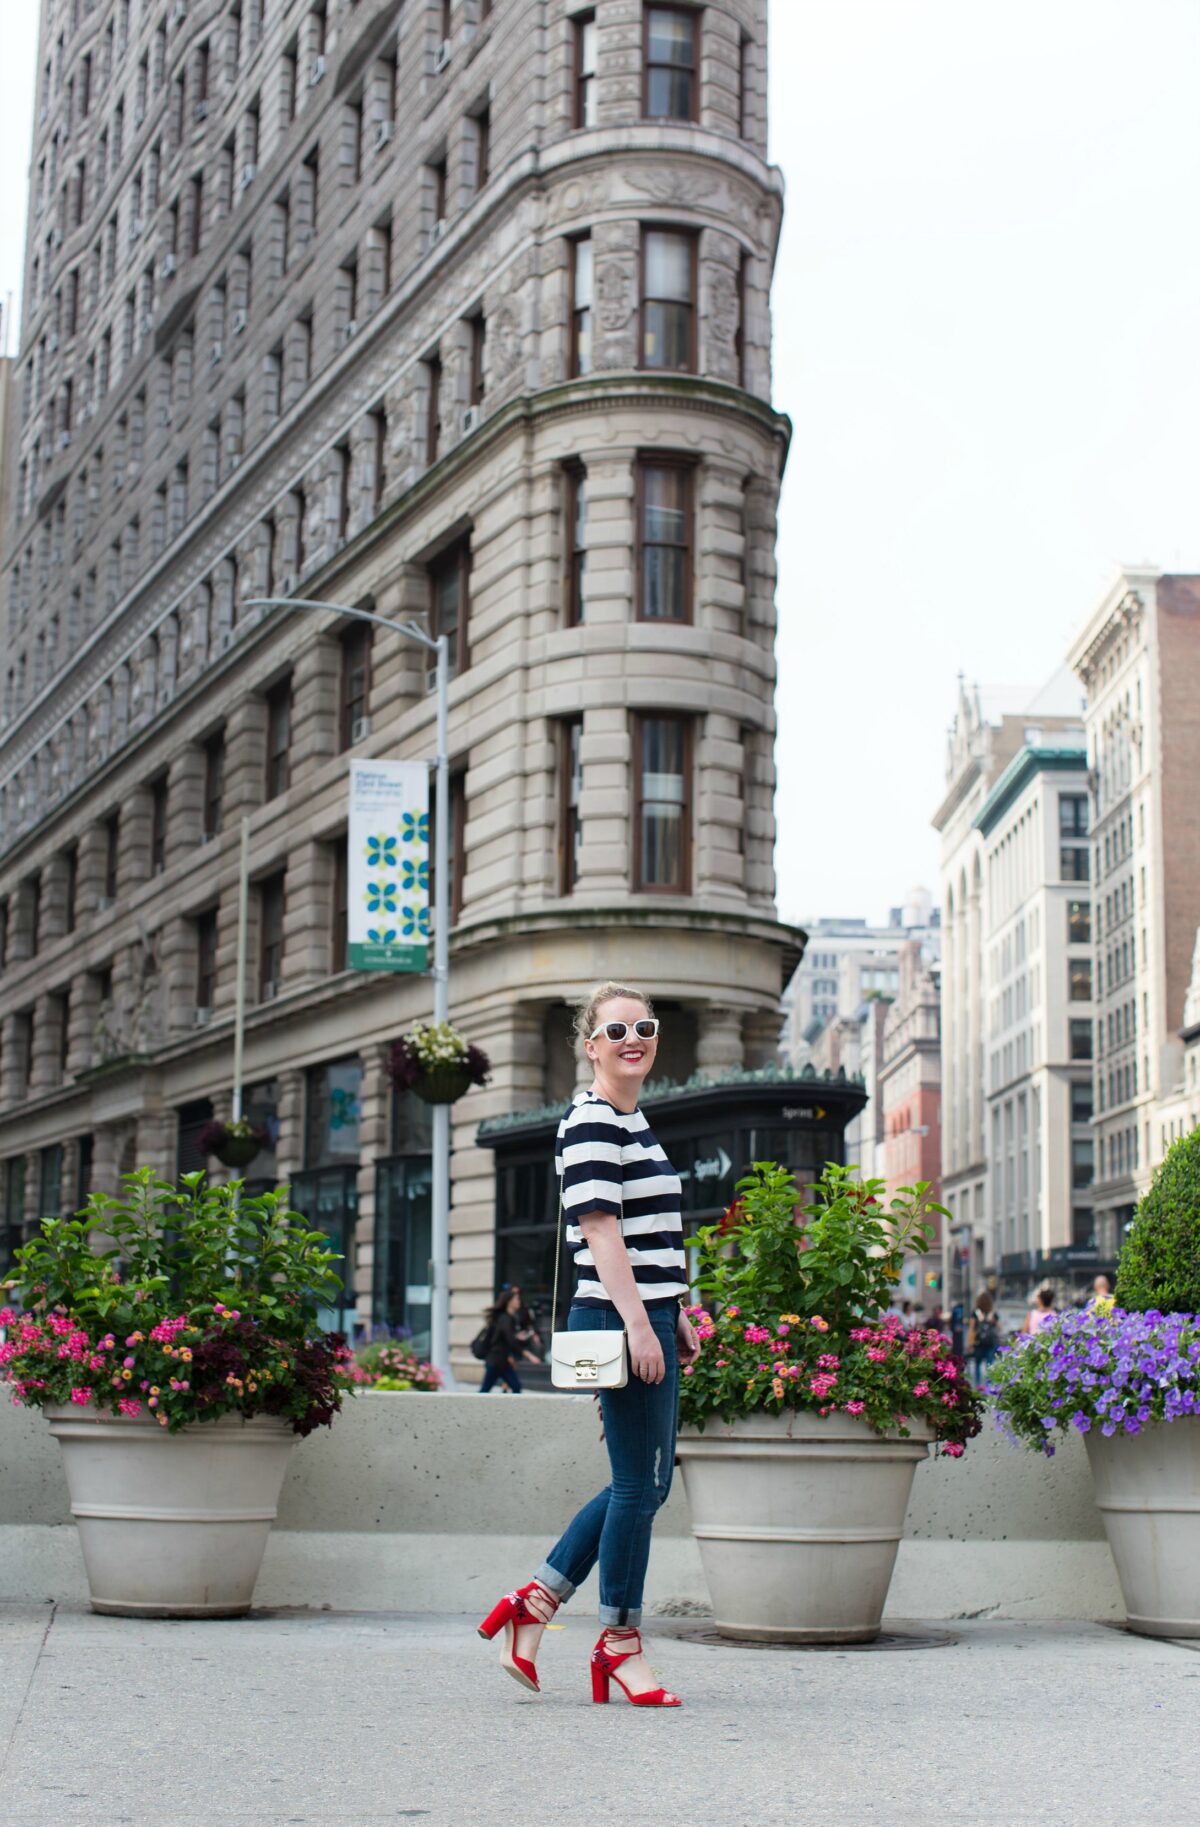 Meghan Donovan of wit & whimsy wears a striped tee with boyfriend jeans